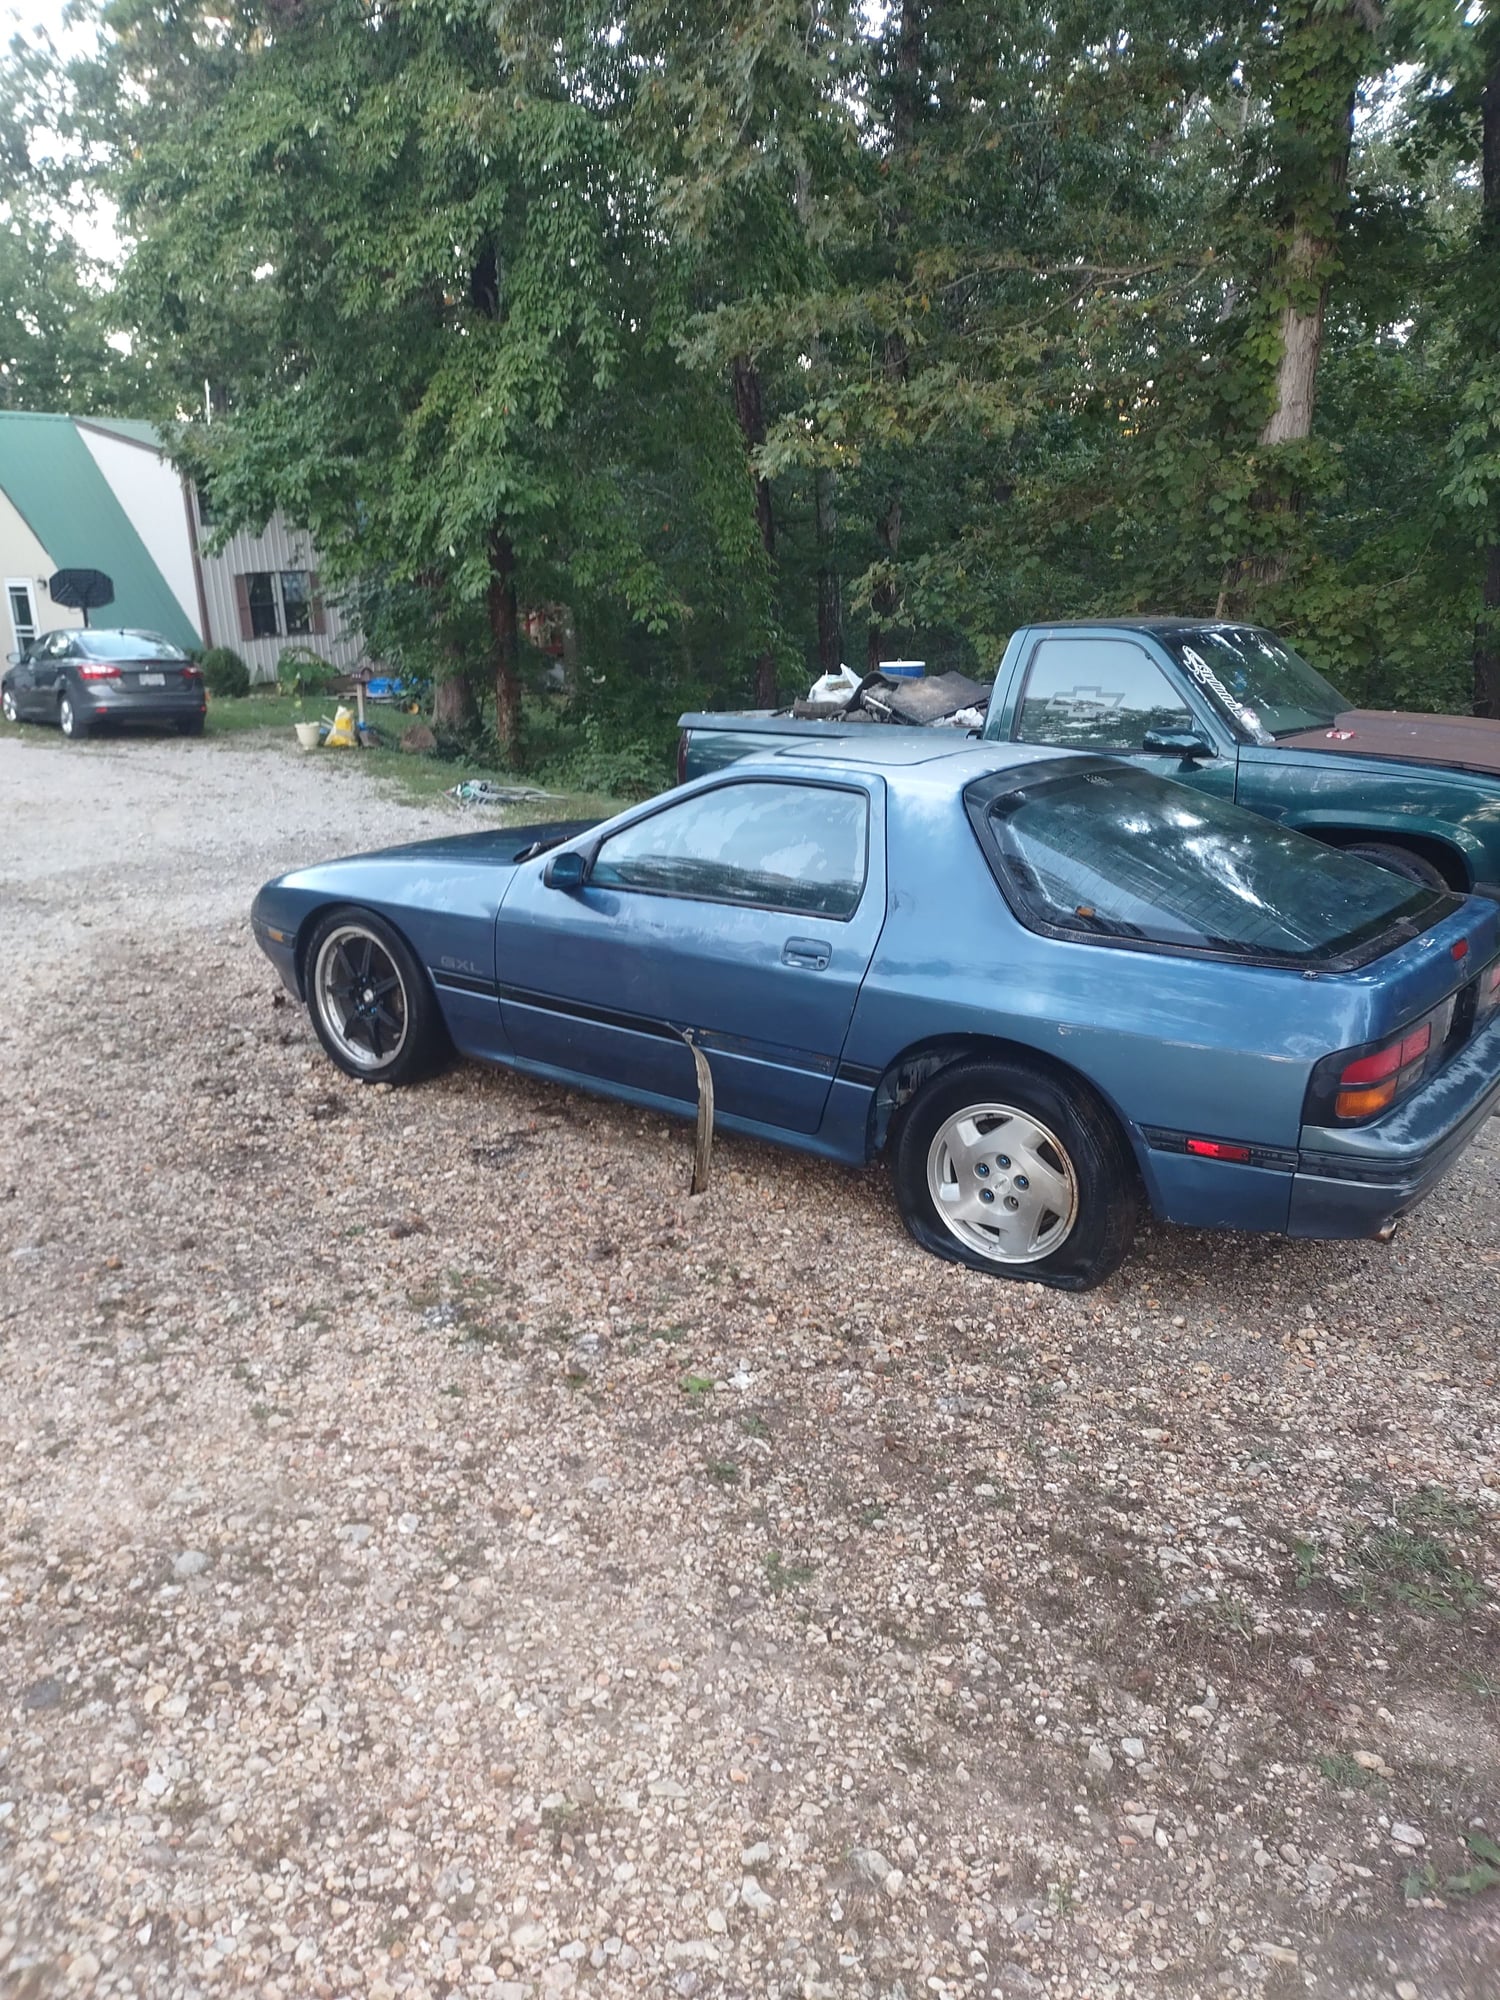 1988 Mazda RX-7 - 1988 gxl - Used - VIN Serious buyers - 148,000 Miles - Other - 2WD - Manual - Coupe - Blue - Willow Springs, MO 65793, United States